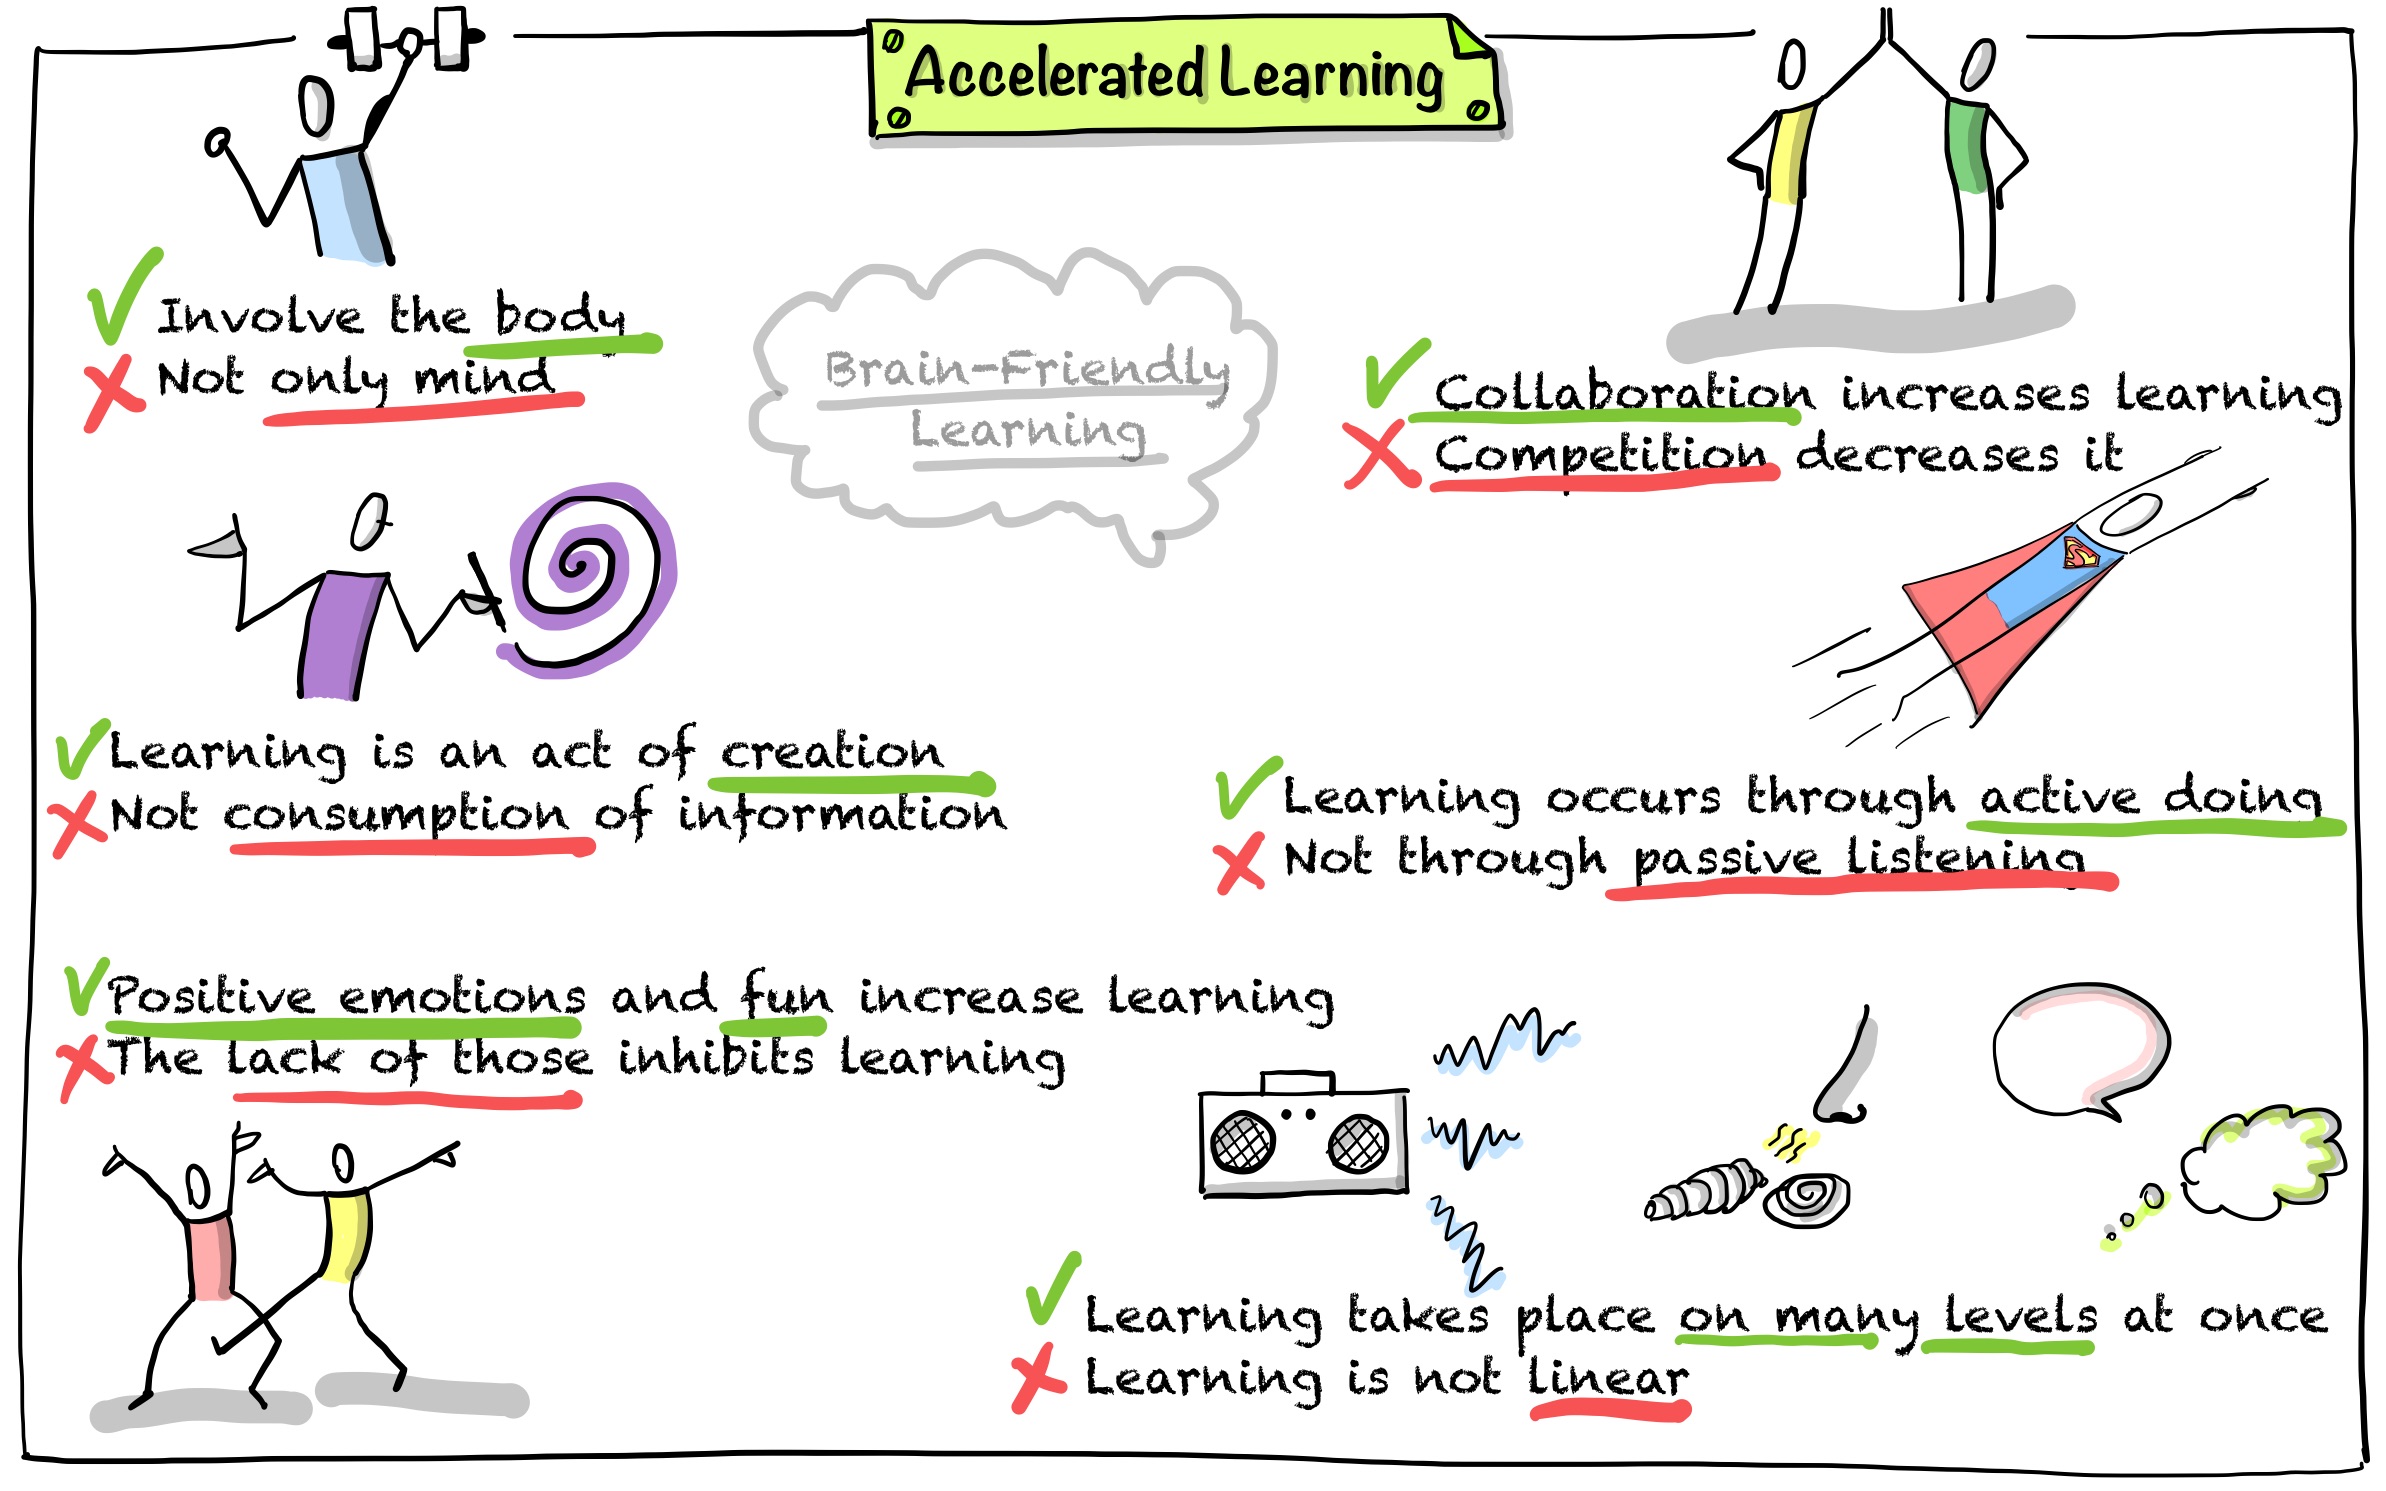 Accelerated Learning and Brain-Friendly Trainings in Pictures